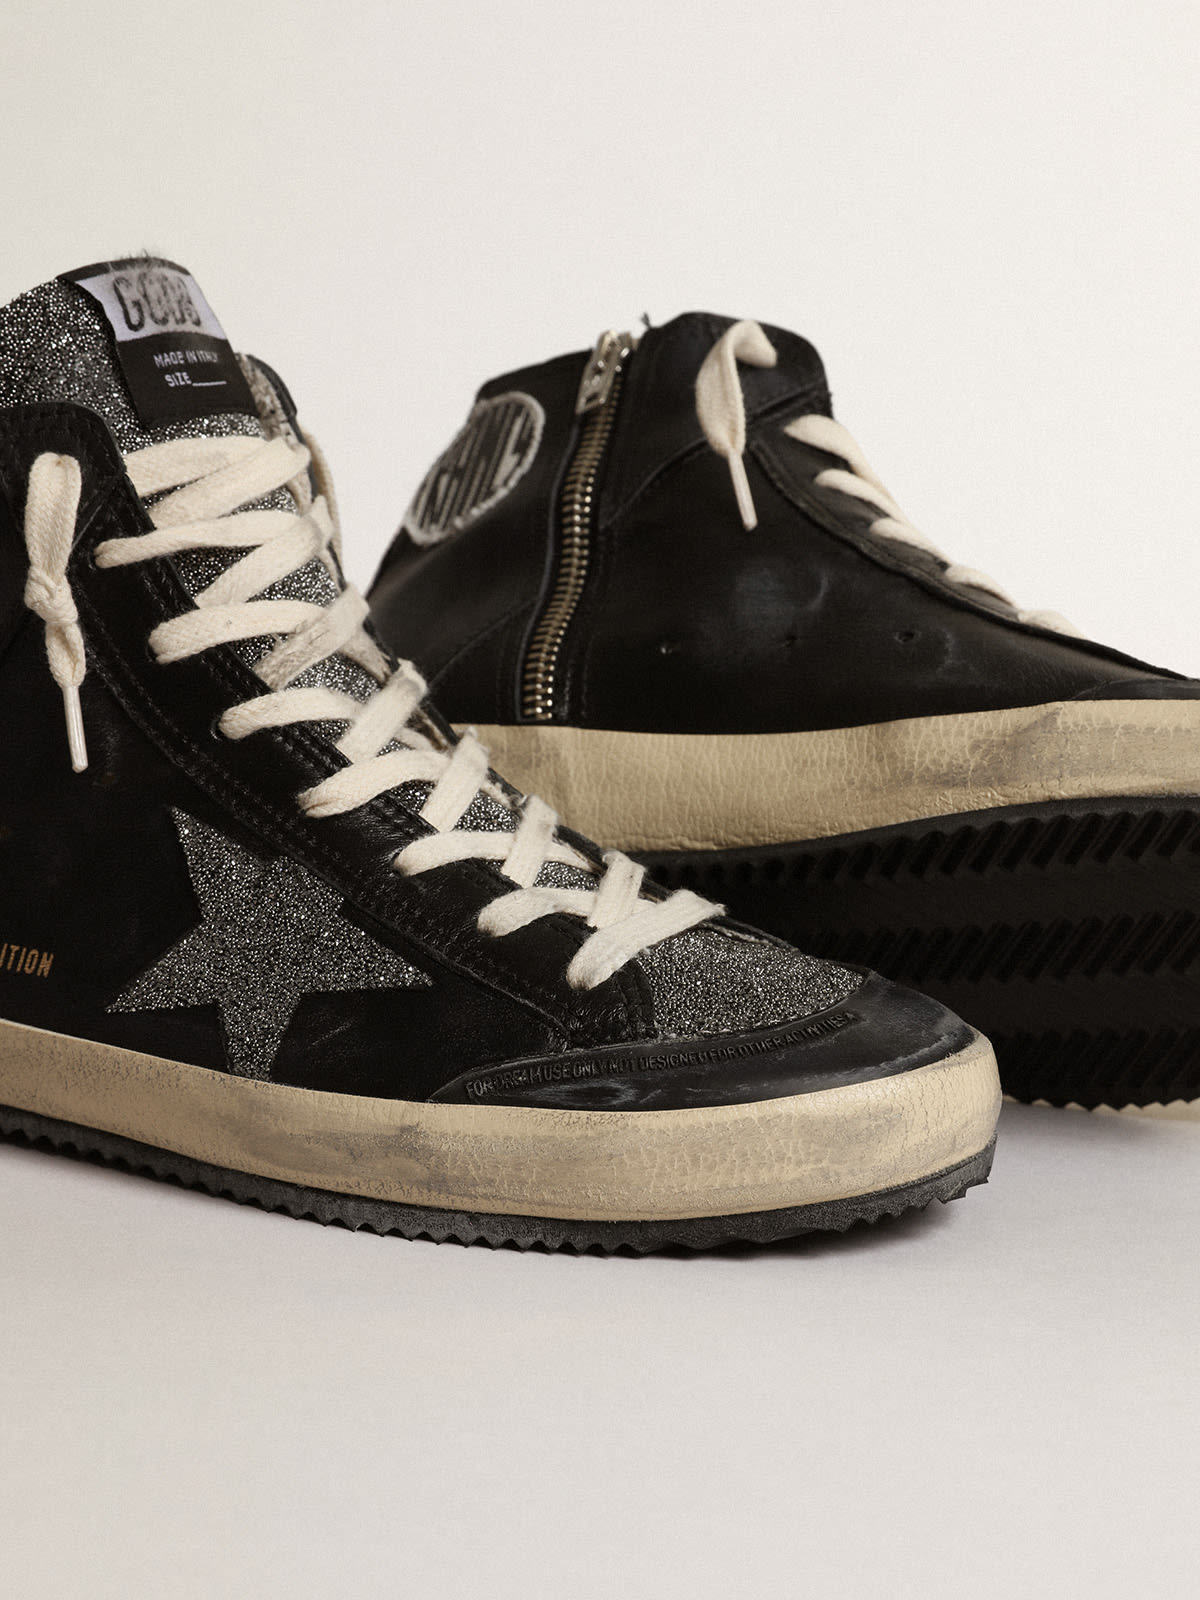 Golden Goose - Women’s Francy Penstar LAB in black nappa leather and leather with Swarovski inserts in 